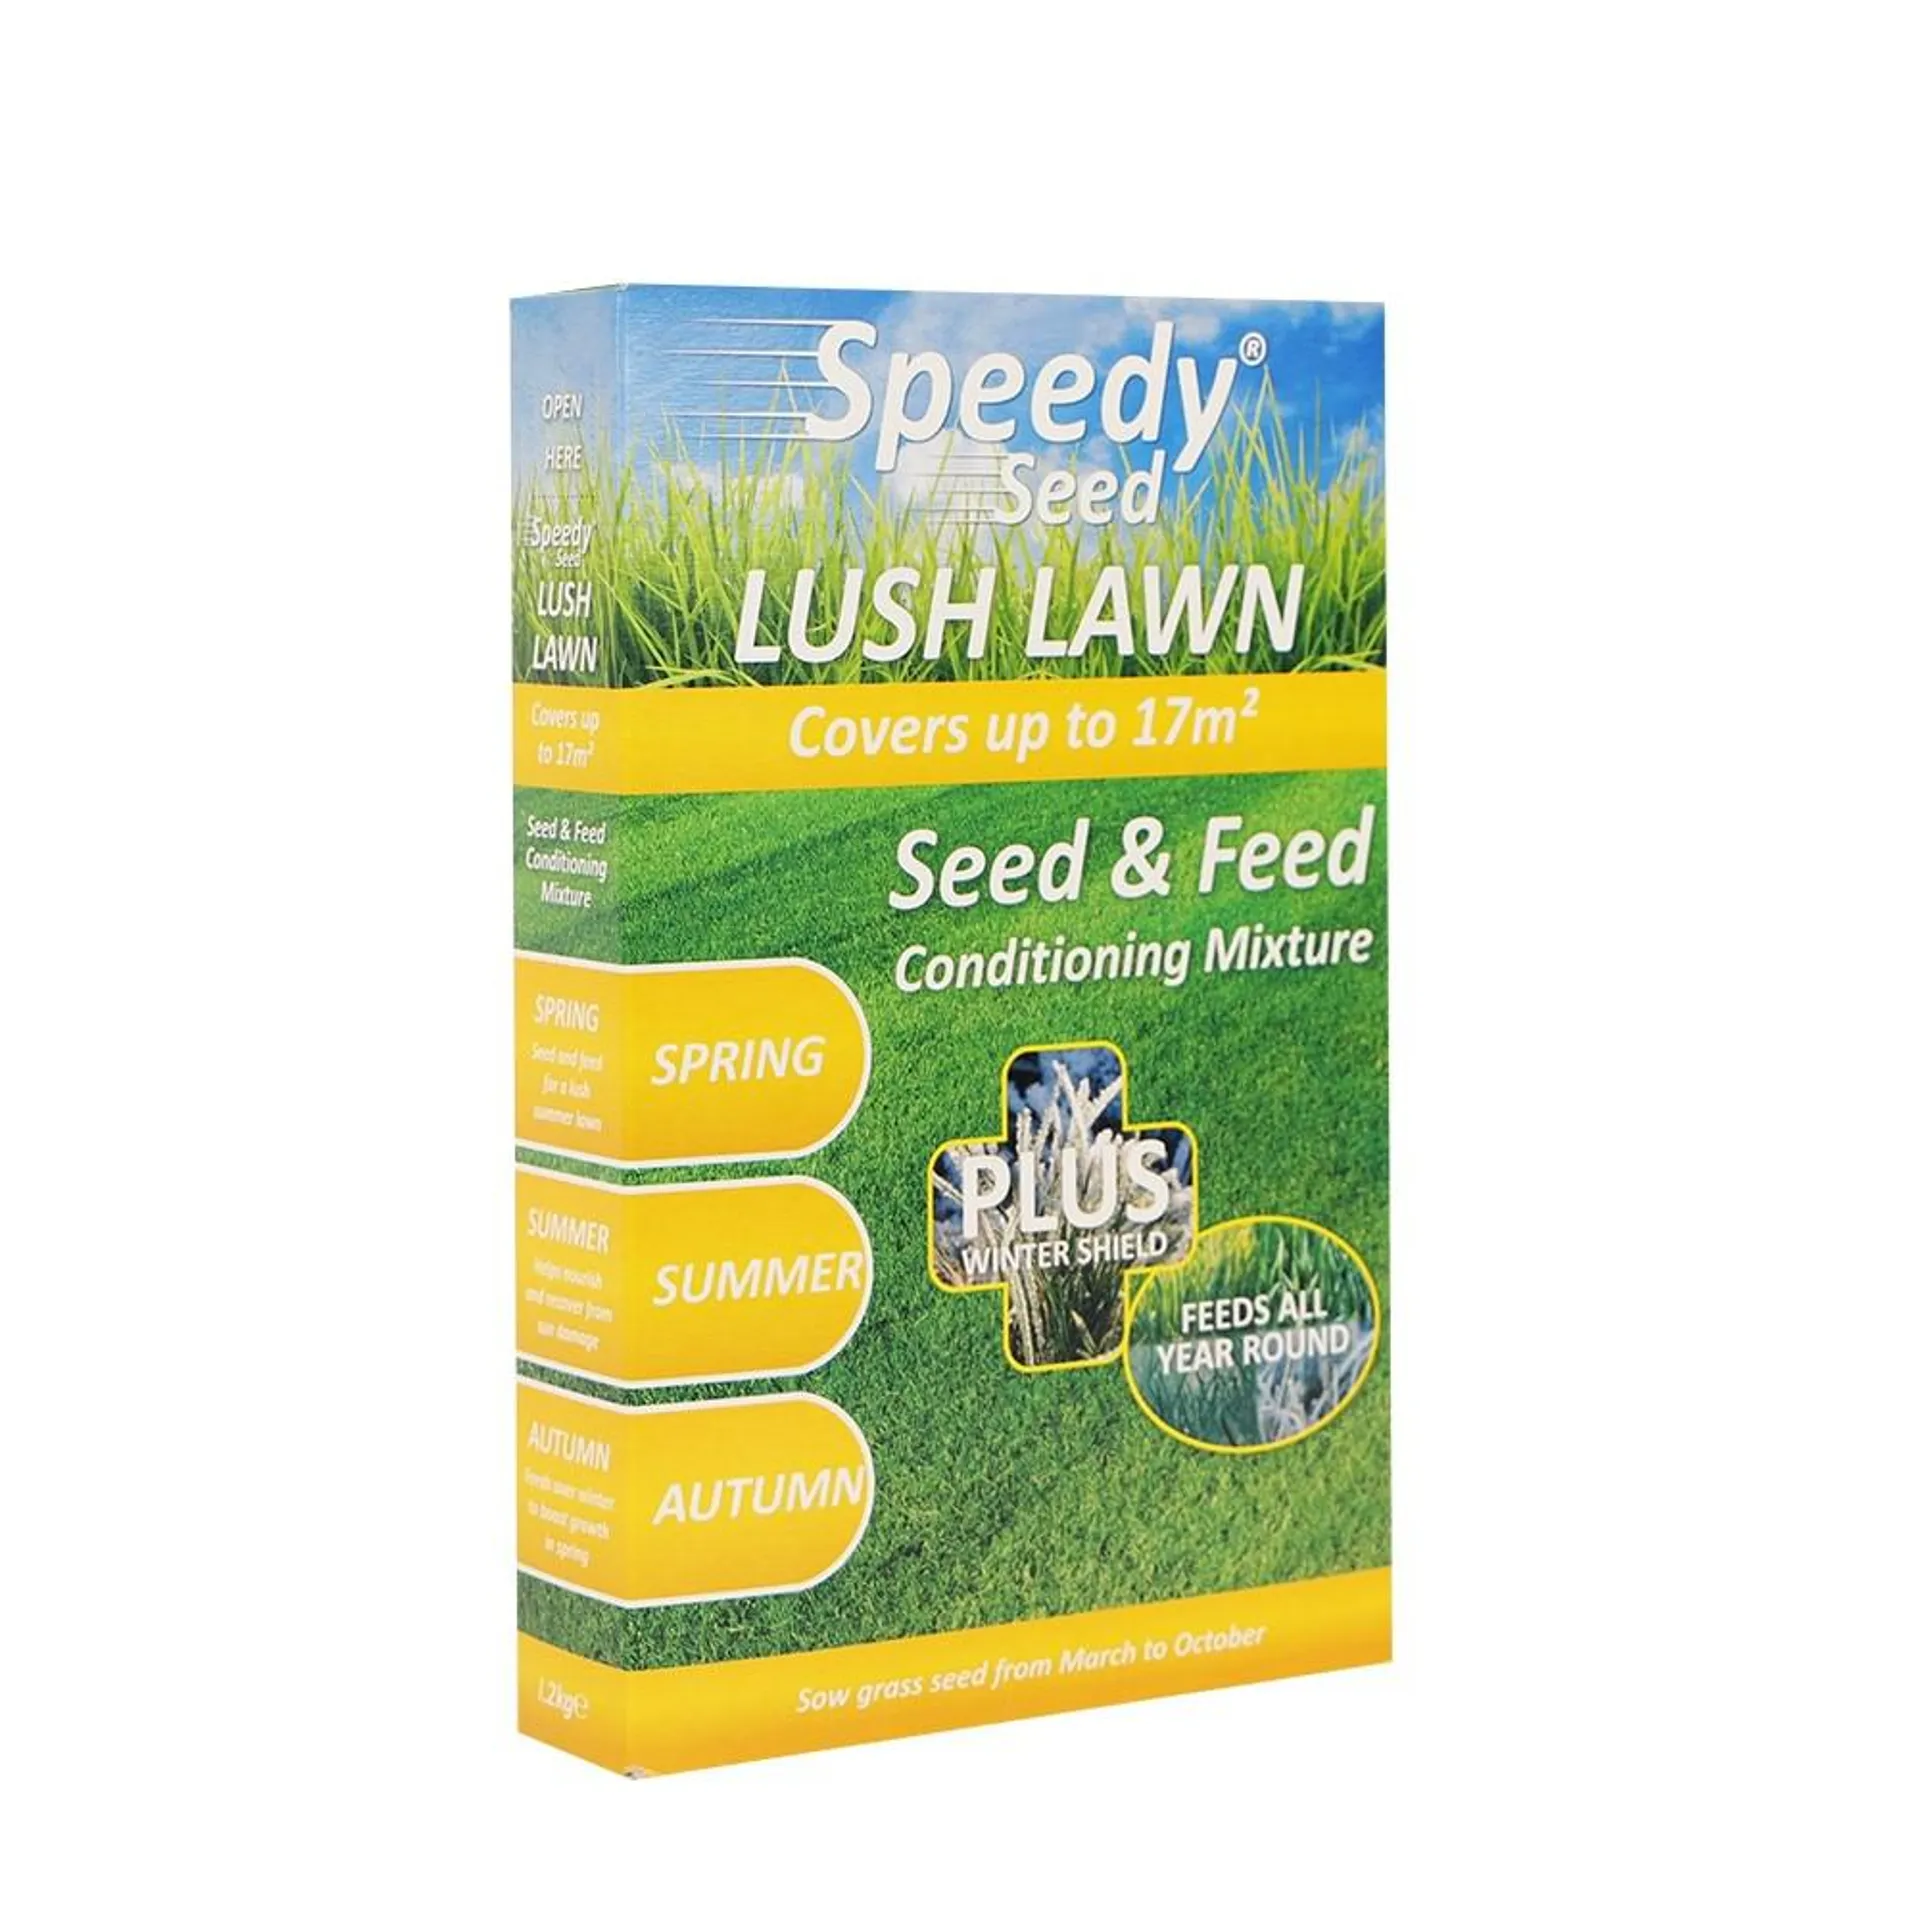 SPEEDY SEED - LUSH LAWN SEED & FEED CONDITIONING MIXTURE